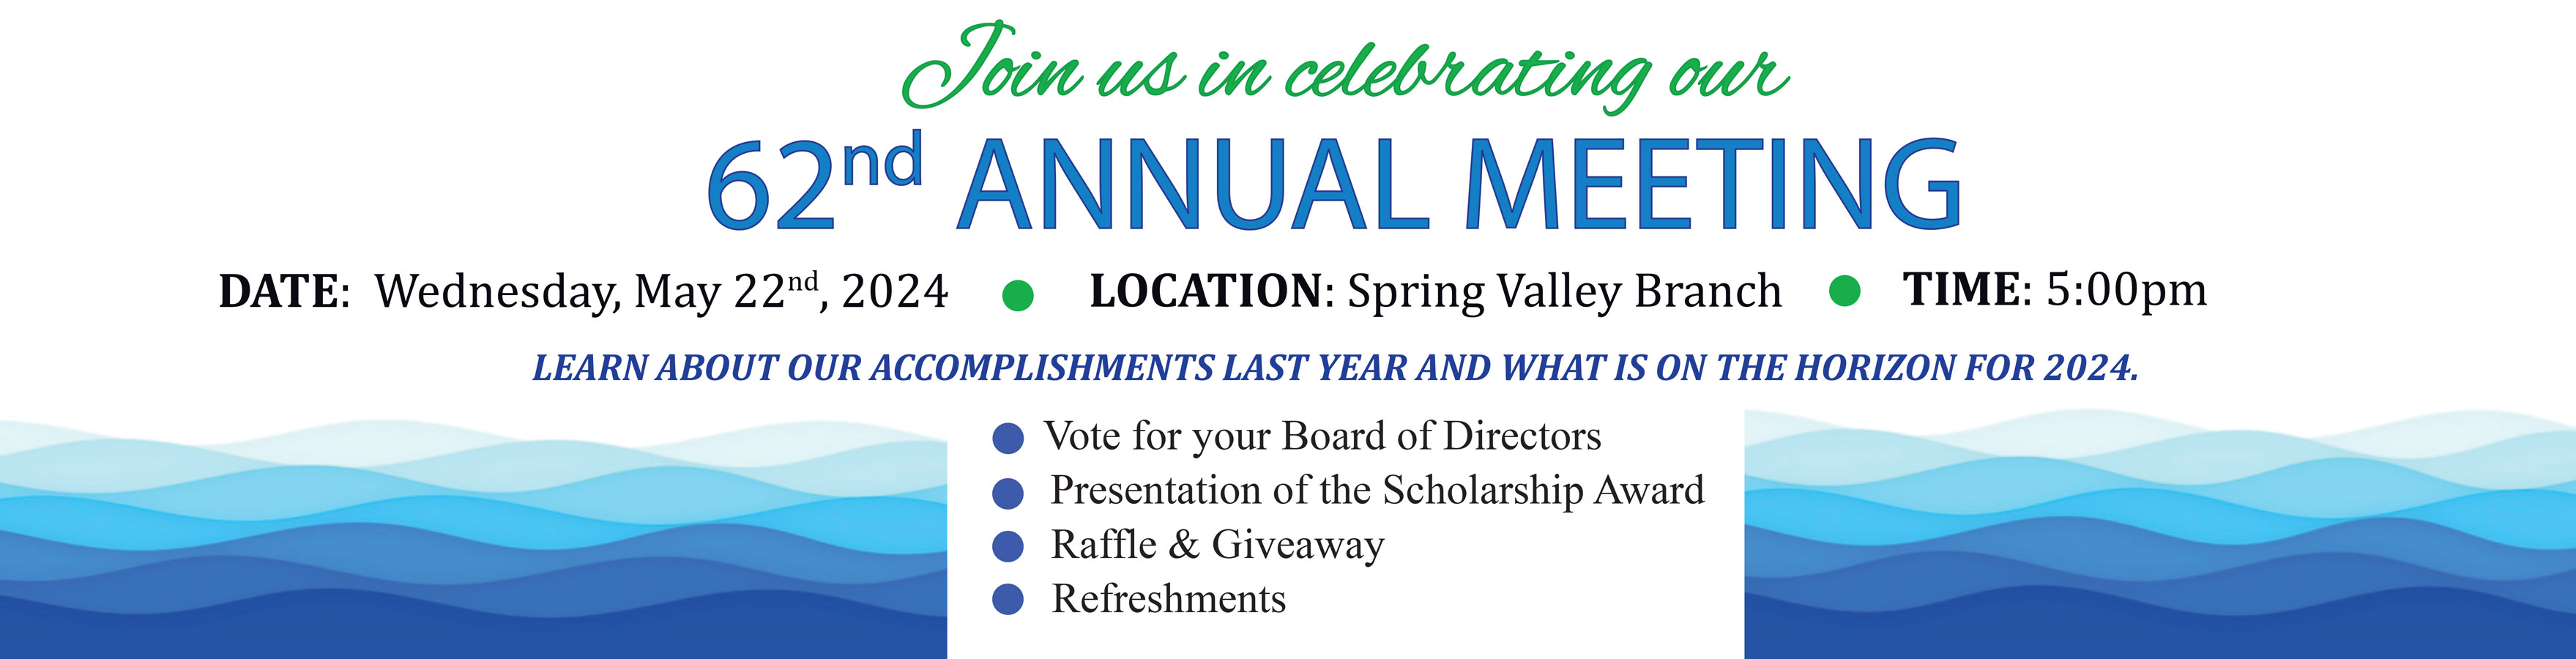 Join us in celebrating our 62nd Annual meeting on May 22nd